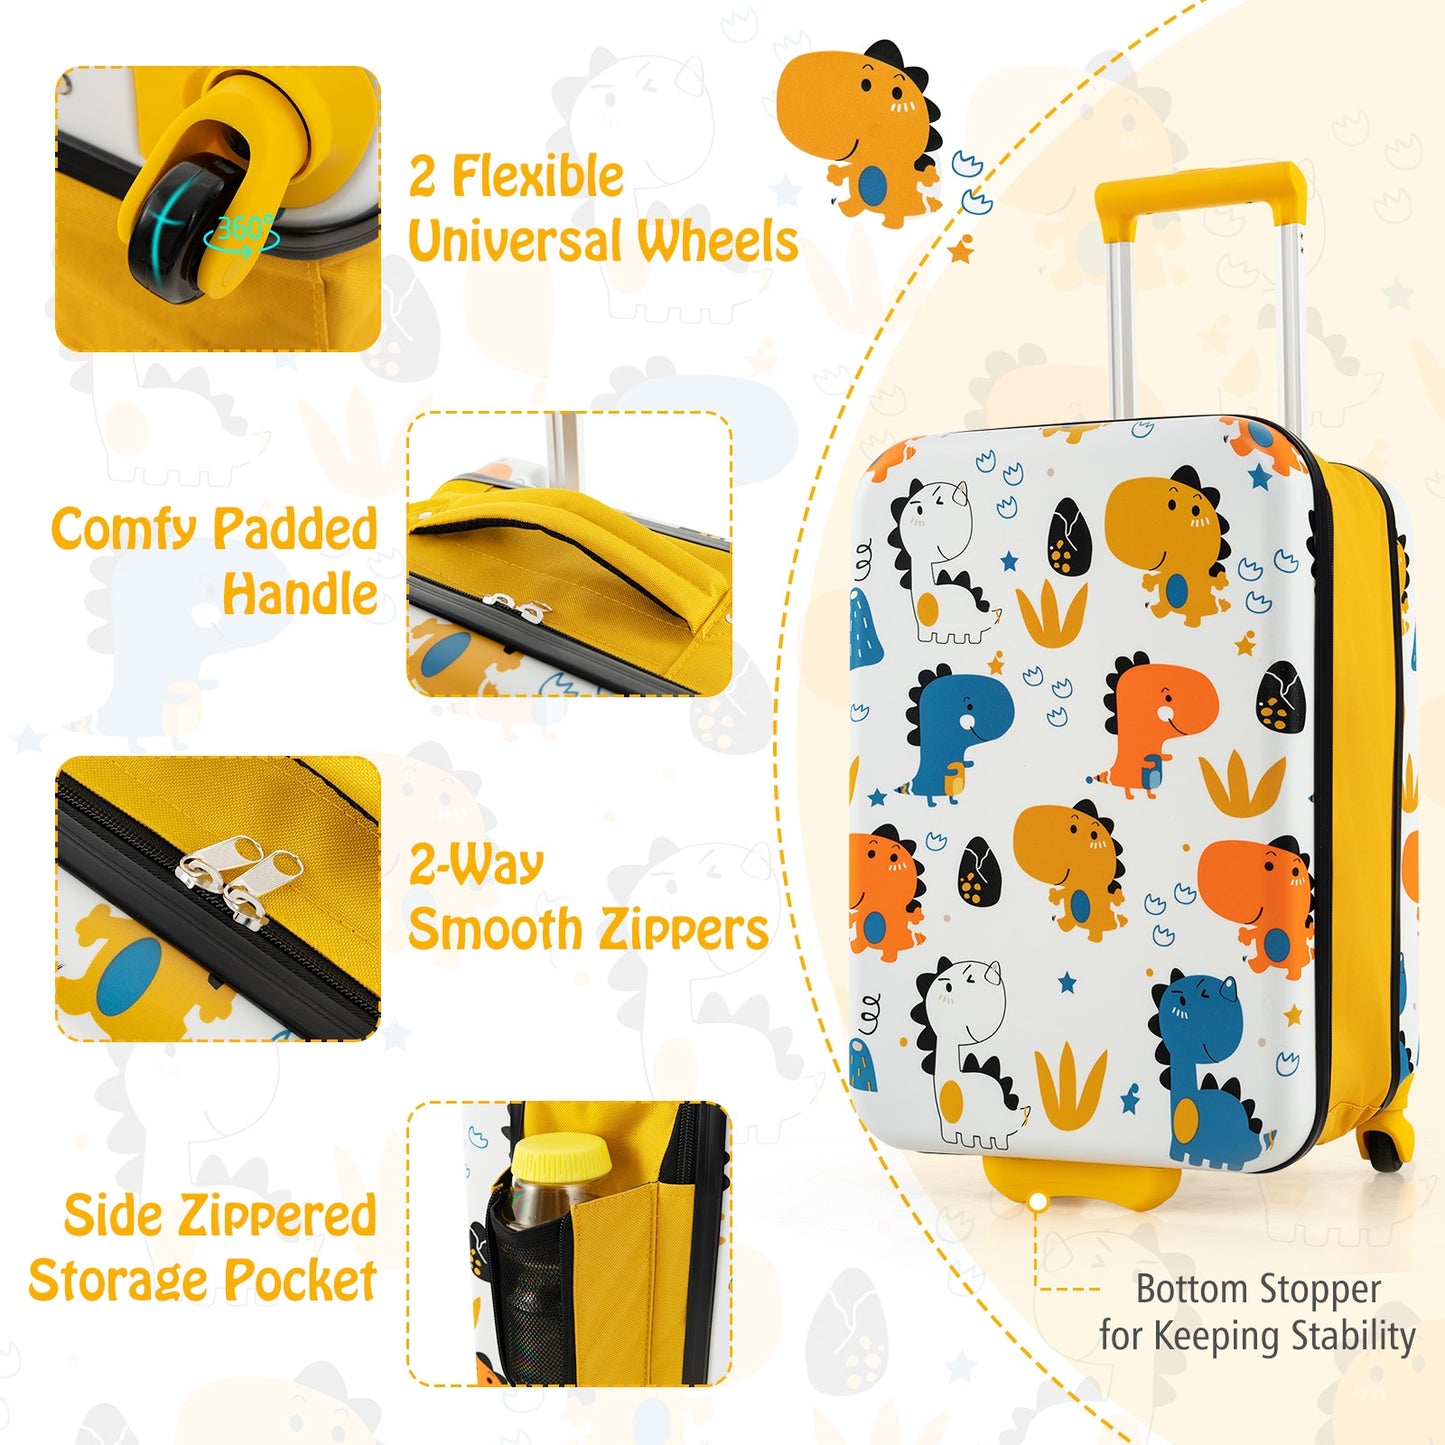 20 Inch Kids Rolling Luggage Foldable Hardshell Carry-on Suitcase on Wheels-Yellow